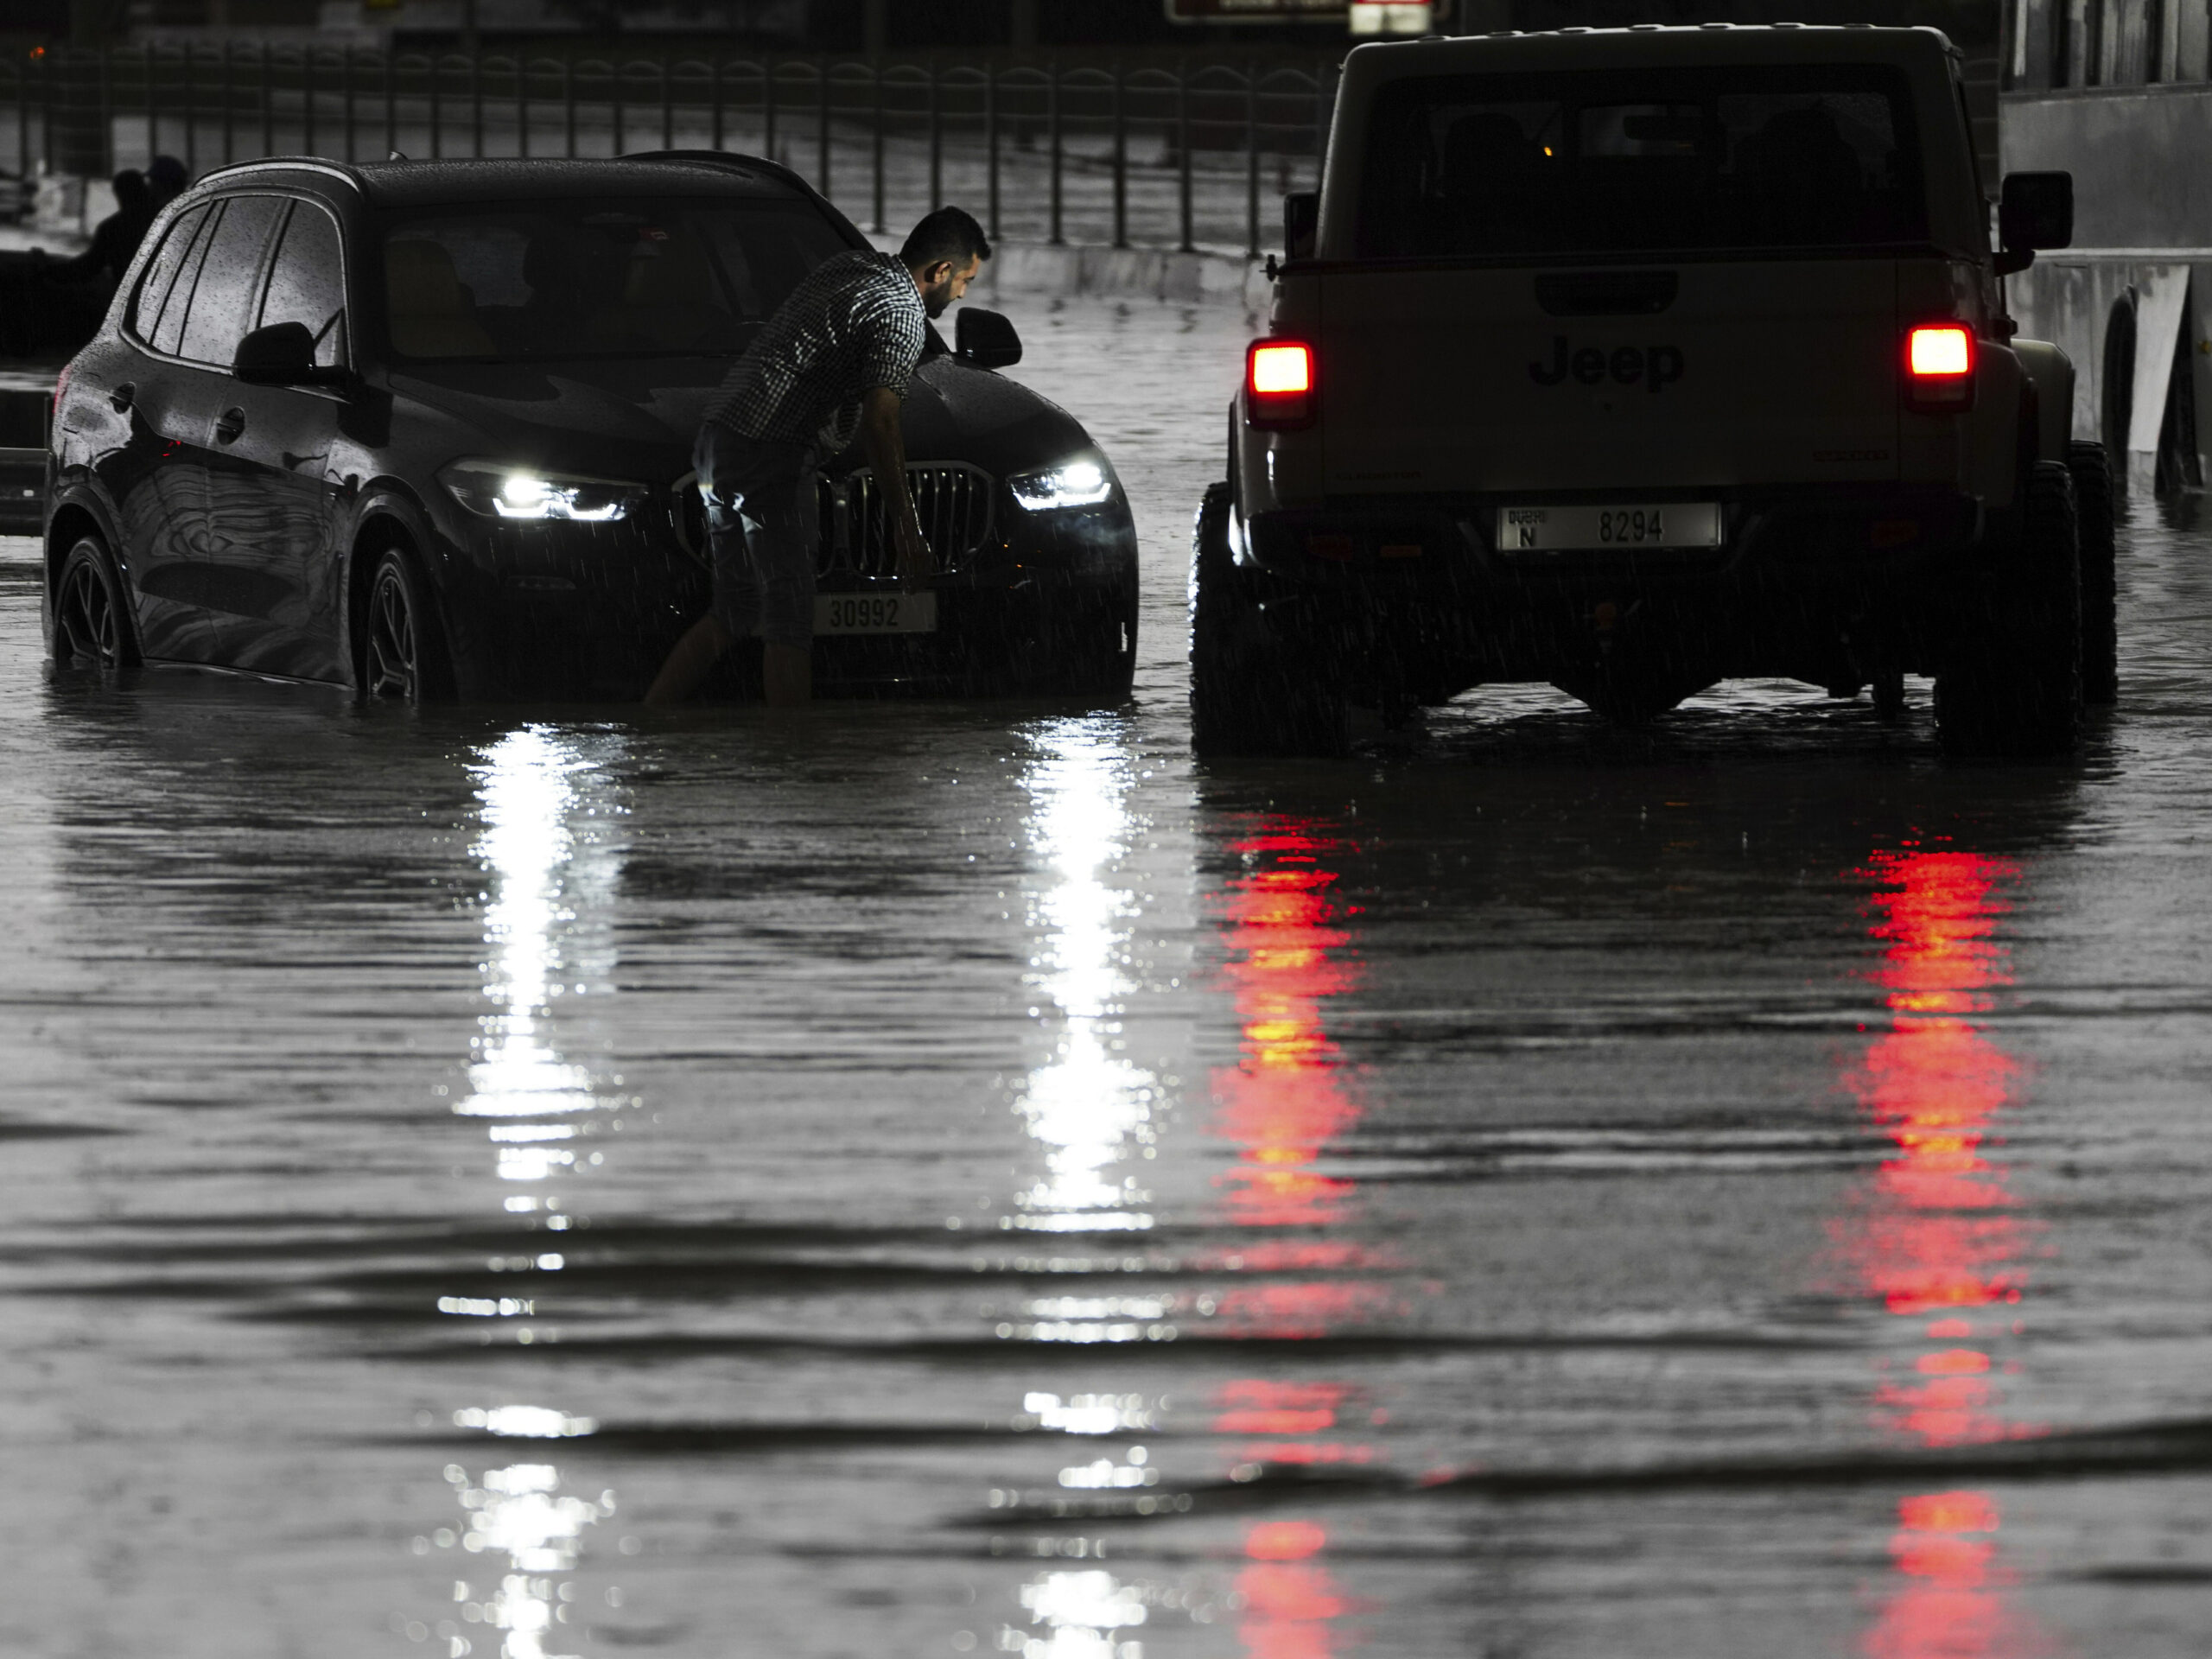 A man tries to work on his stalled SUV in standing water in Dubai, United Arab Emirates, on Tuesday.